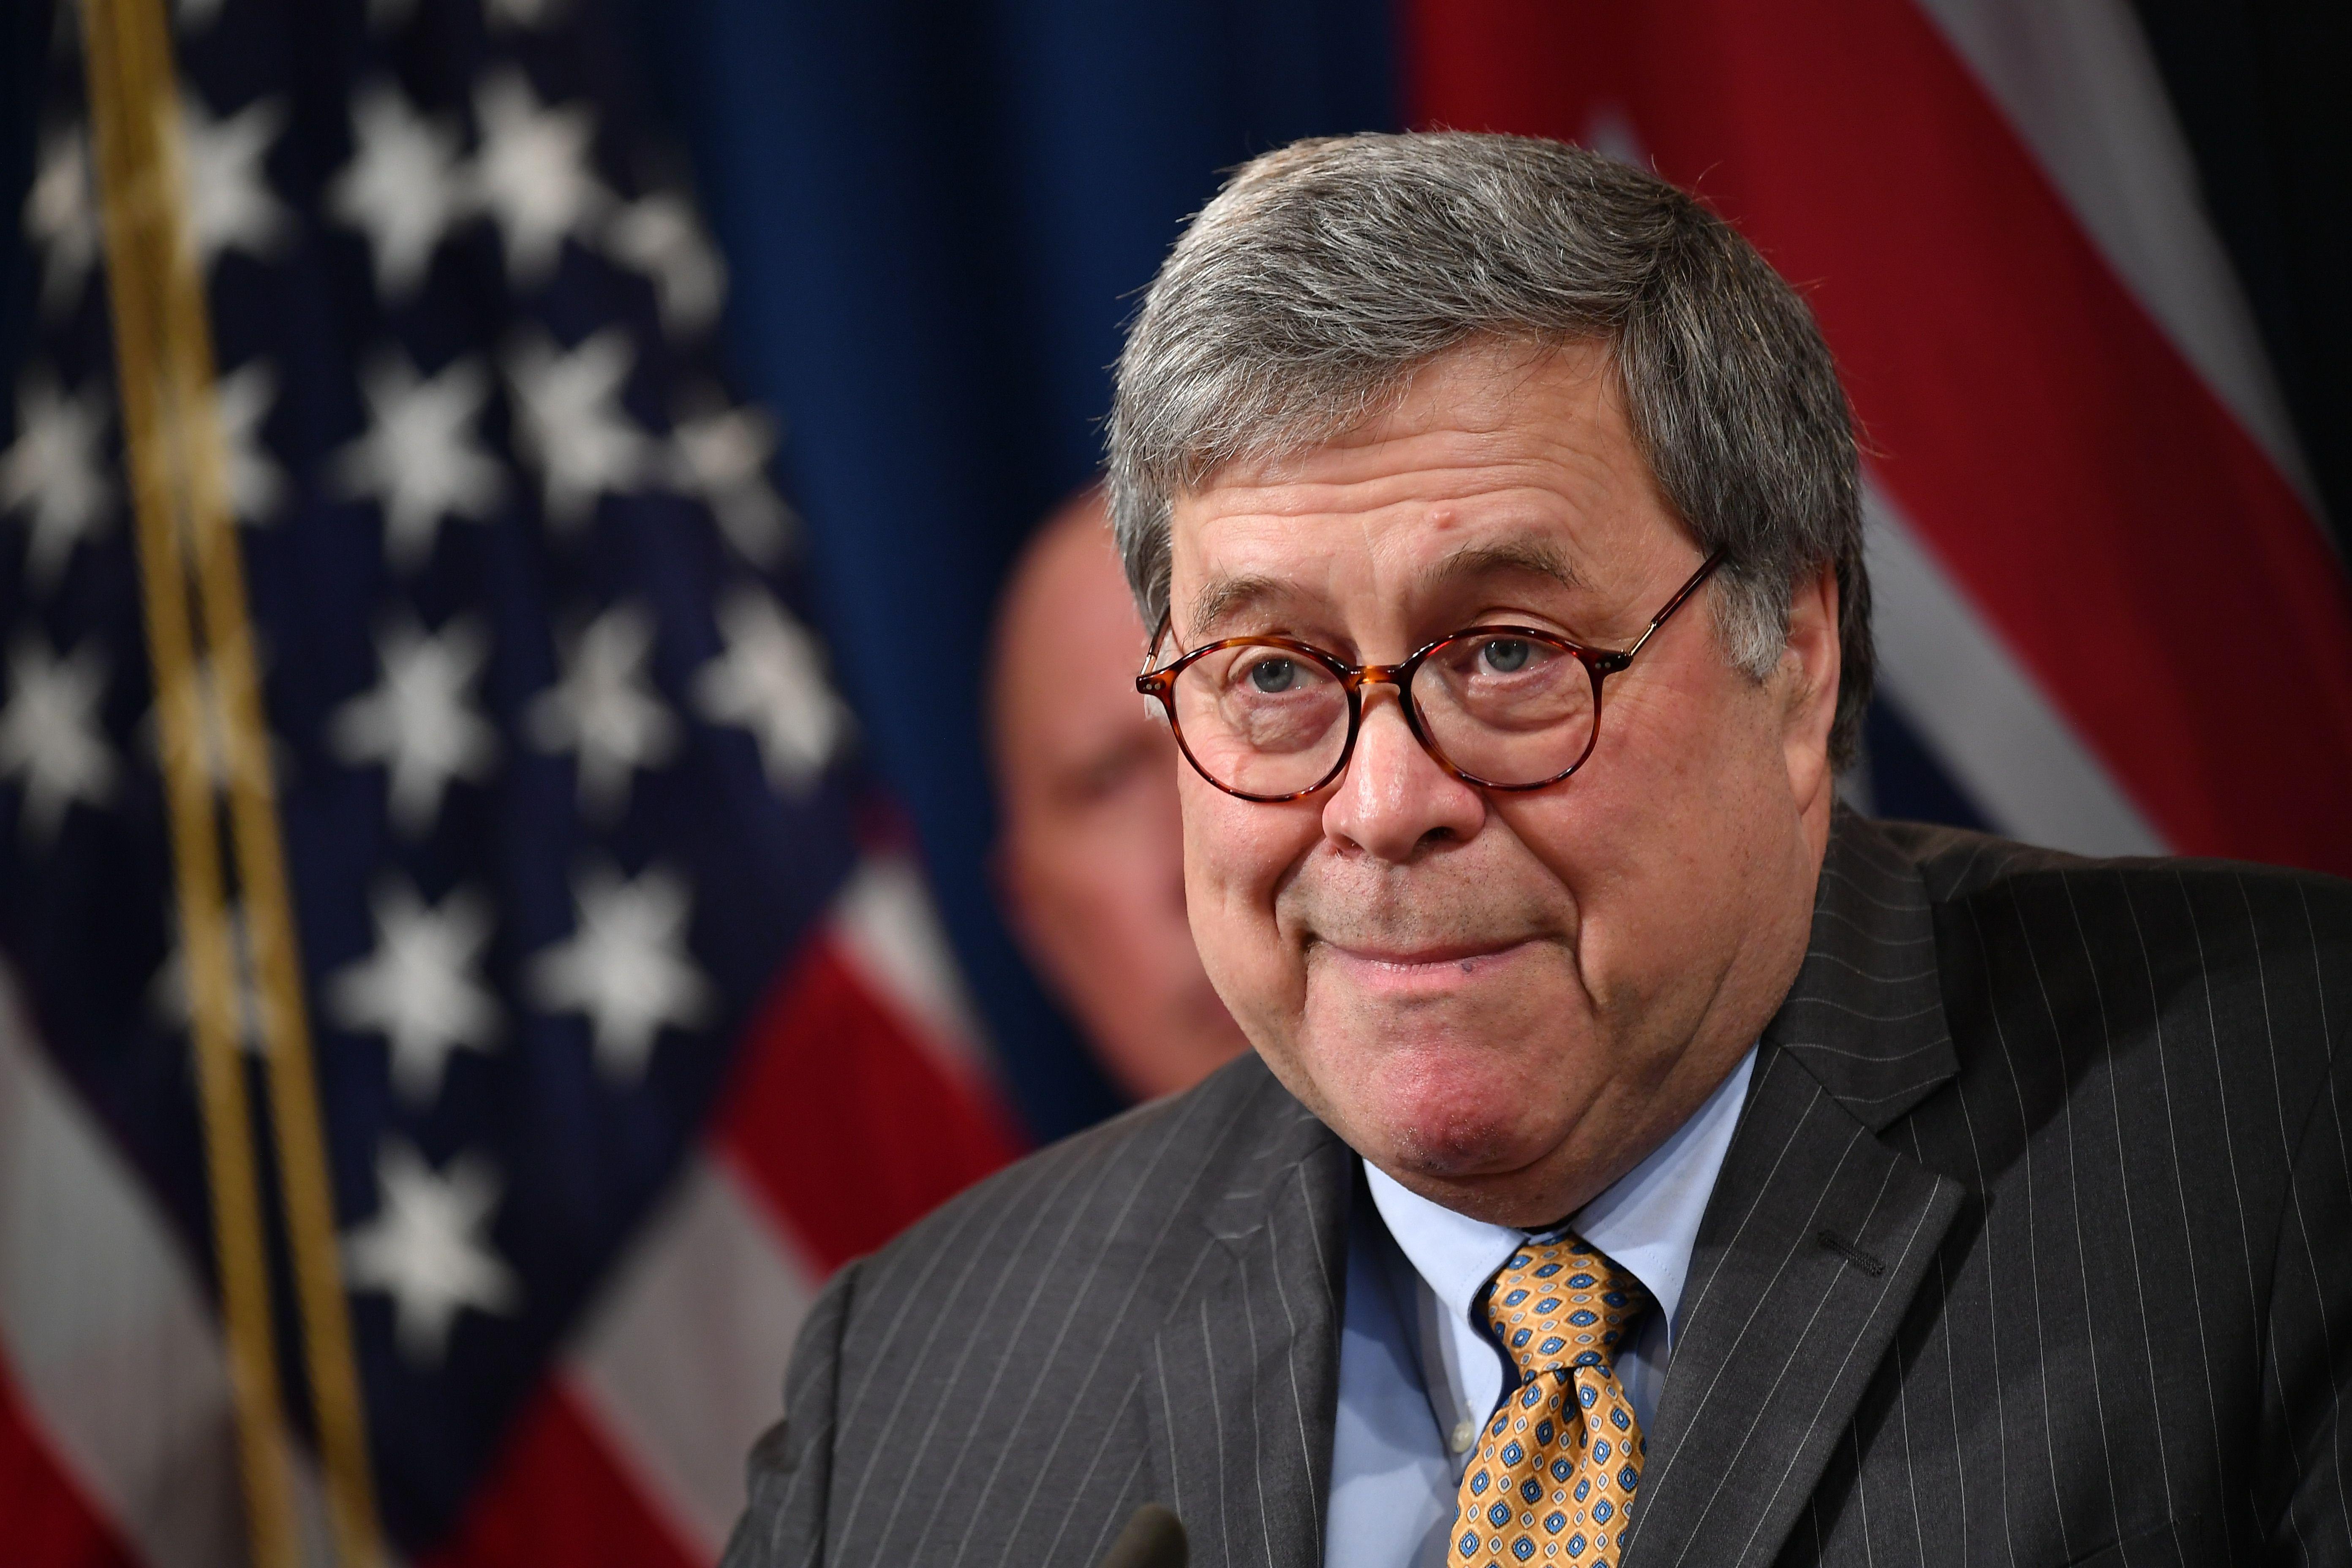 Barr smiles widely in front of the American flag.